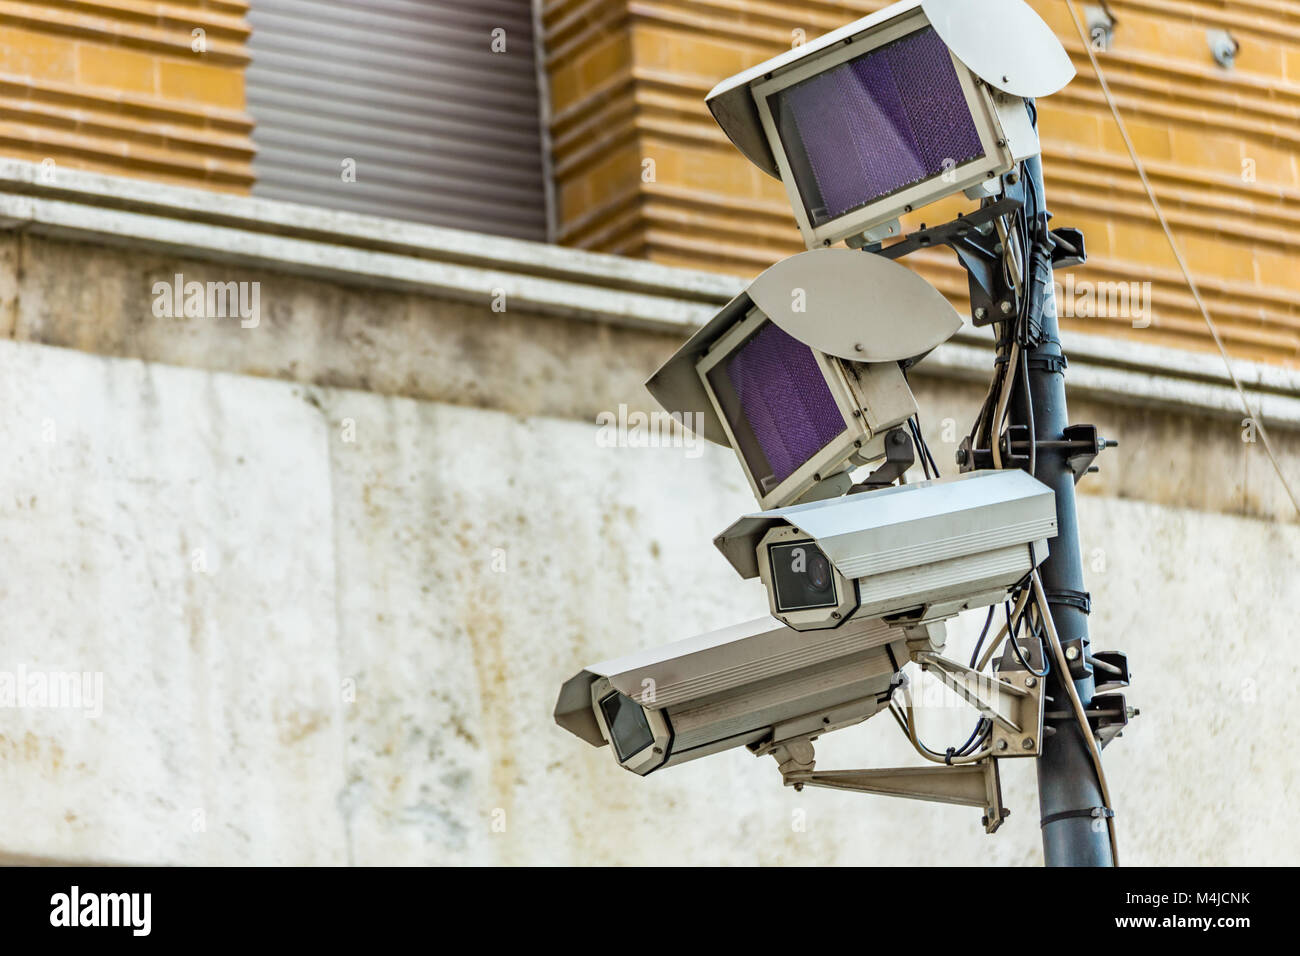 cameras of electronic surveillance system supervise the entrances to the  Limited Traffic Area of historical center in Italian city Stock Photo -  Alamy